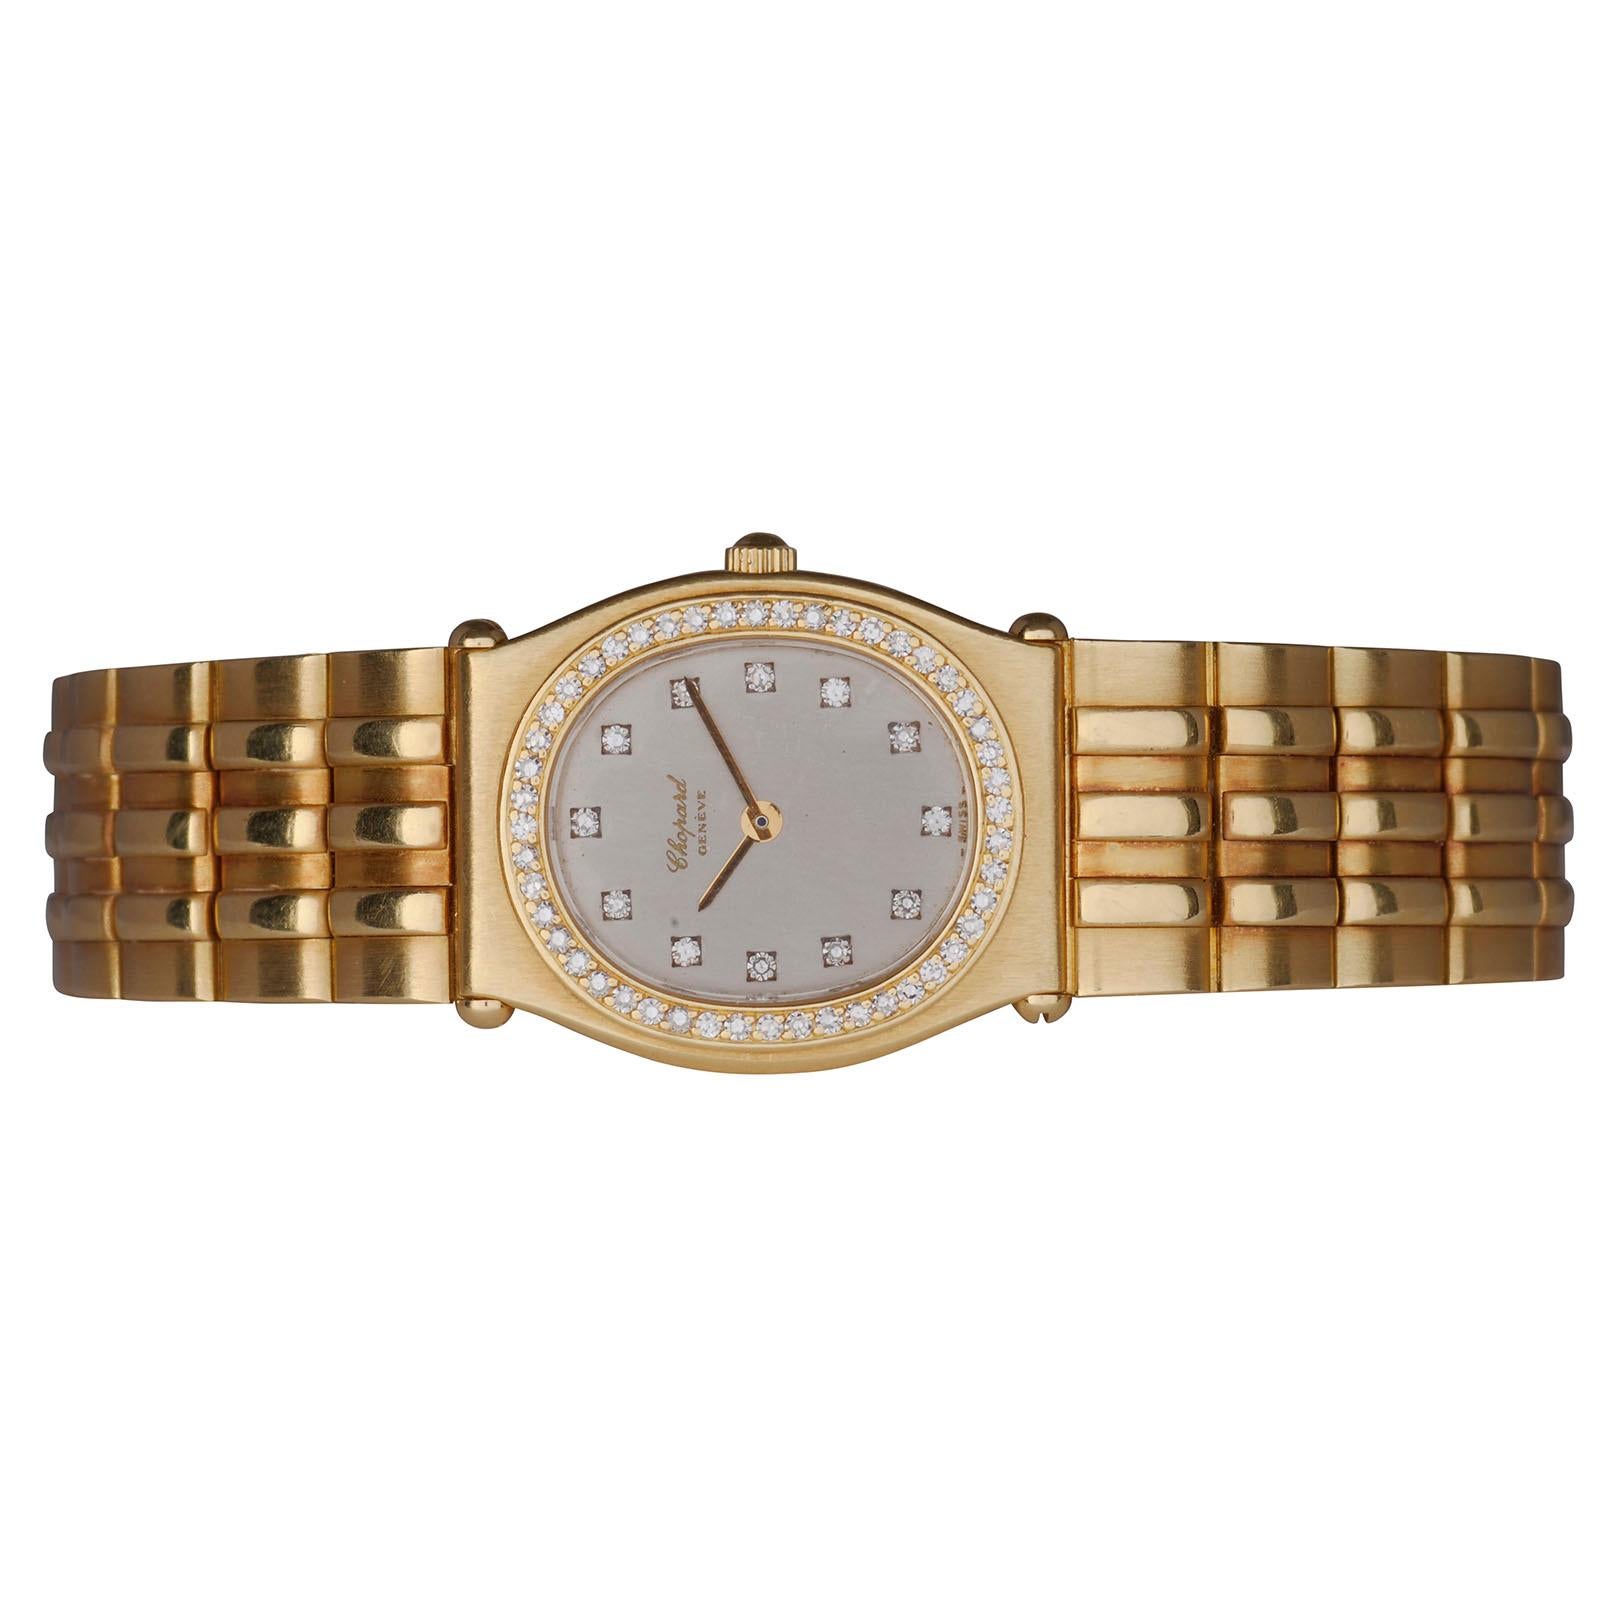 Estate Chopard Monte Carlo diamond ladies wrist watch. This Swiss ladies wrist watch has an 18 karat yellow gold case and bracelet. The Chopard ladies wrist watch features a silver dial with diamond markers and a single row diamond bezel. This